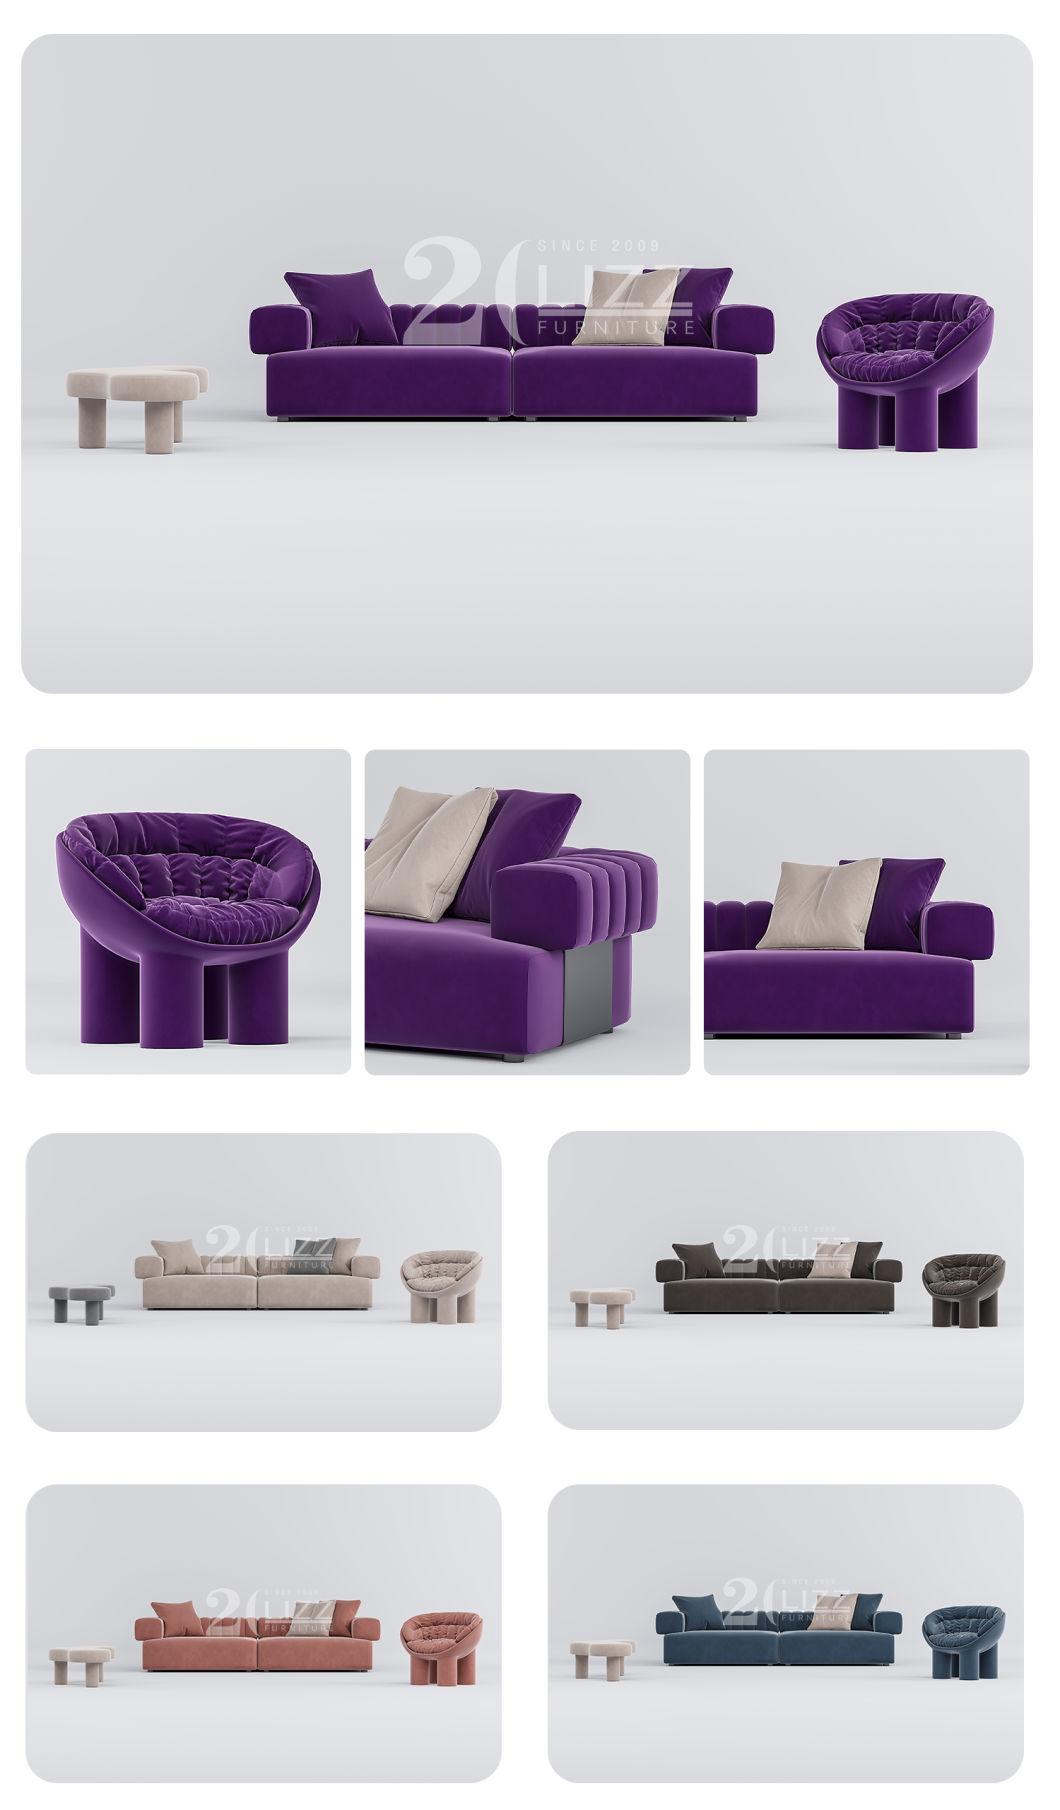 Fashionable Nordic Design Living Room Wood Furniture Sectional Velvet Couch Sofa Set with Sofa Chair